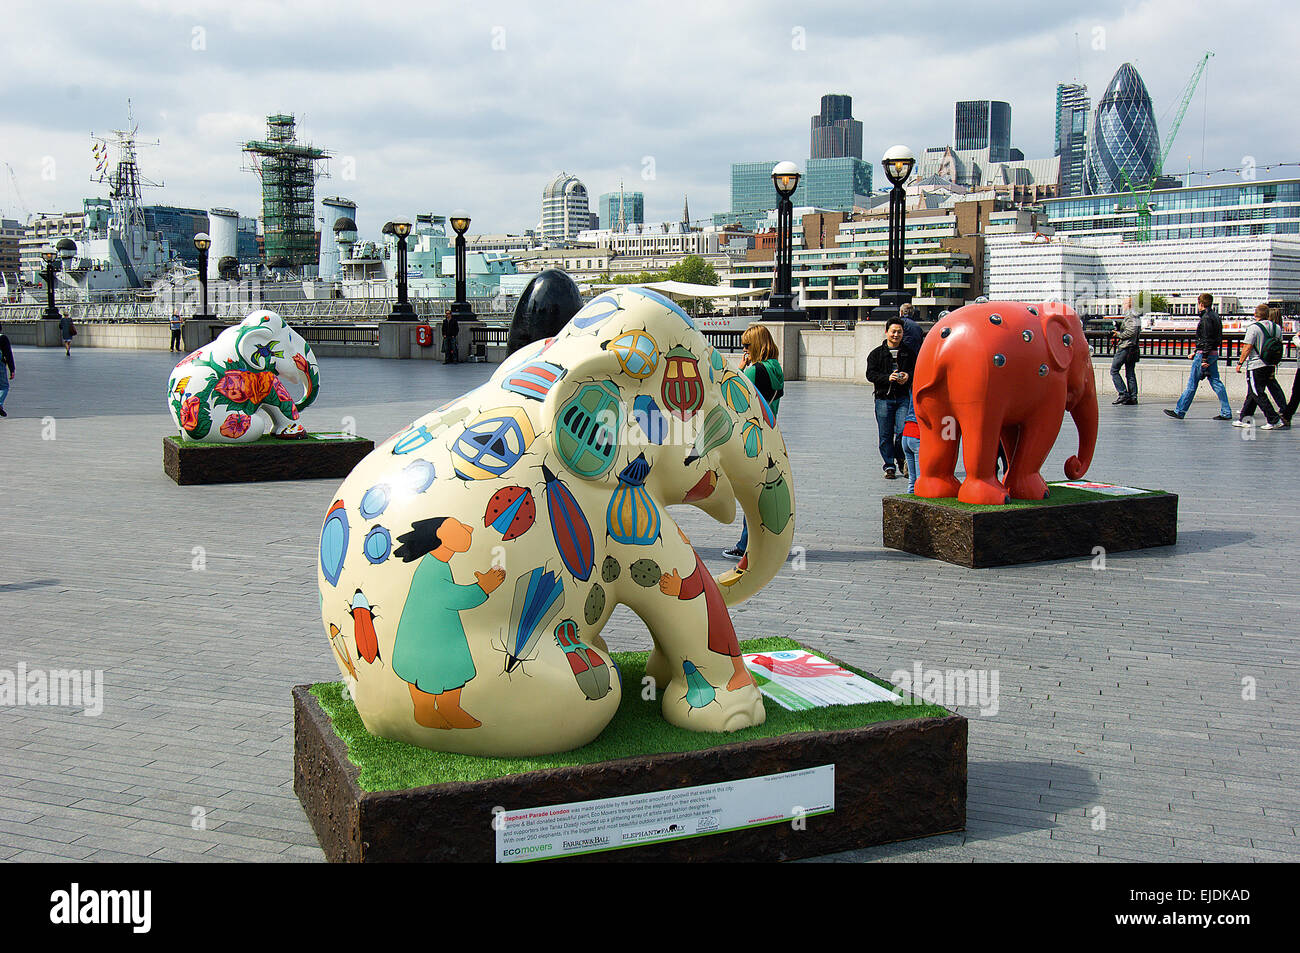 There were 260 elephants scattered all over central London in the summer of 2010. Each one was designed by someone different. Stock Photo